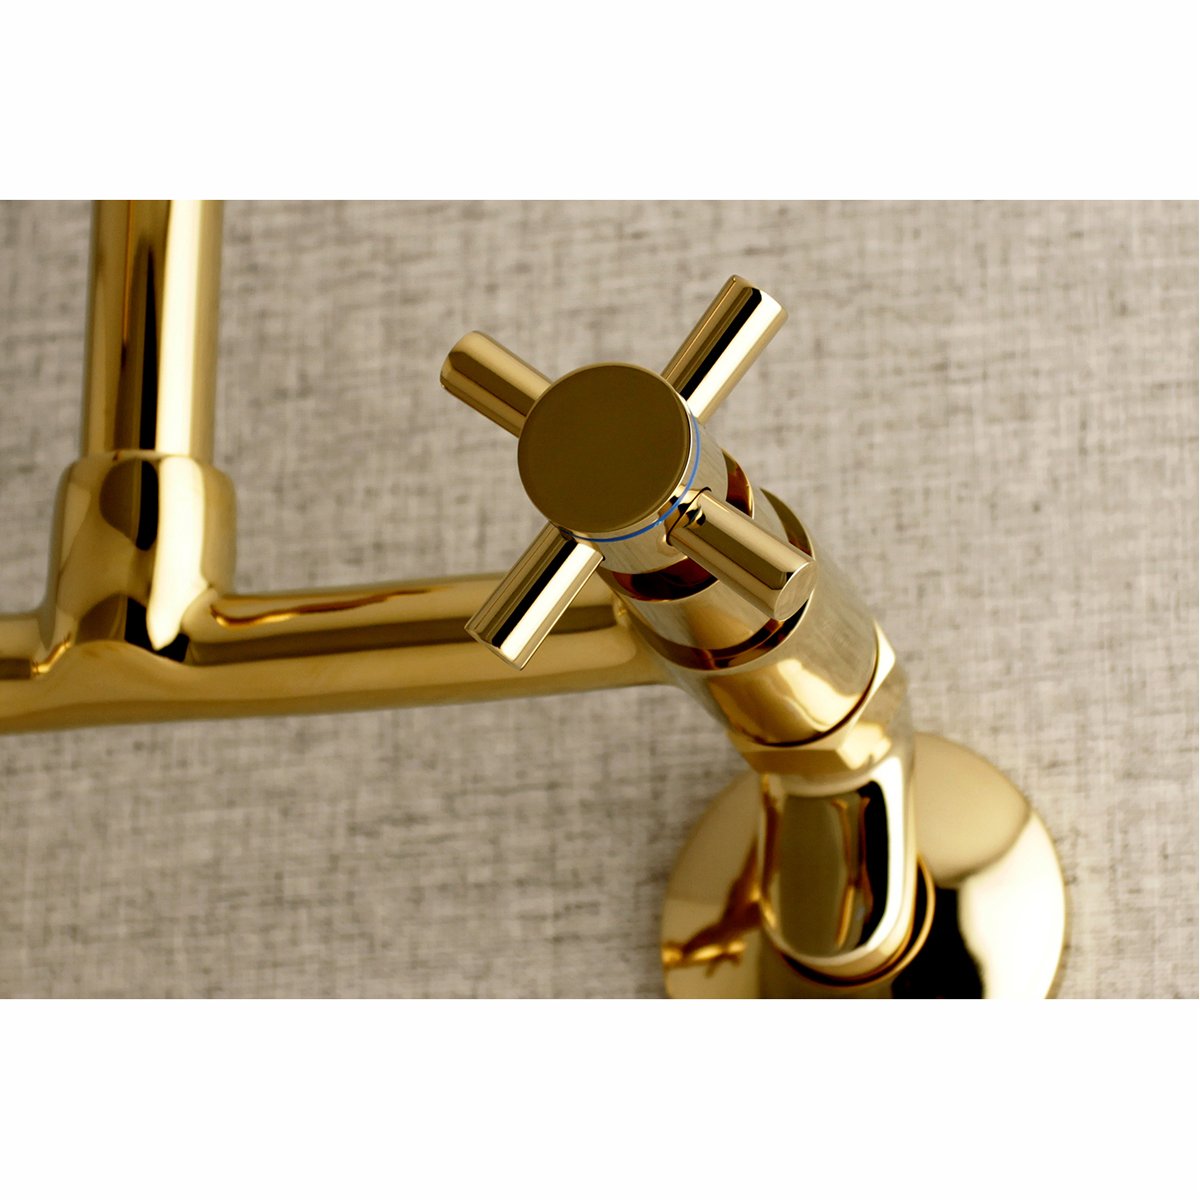 Kingston Brass Concord 8-Inch Adjustable Center 2-Hole Wall Mount Kitchen Faucet